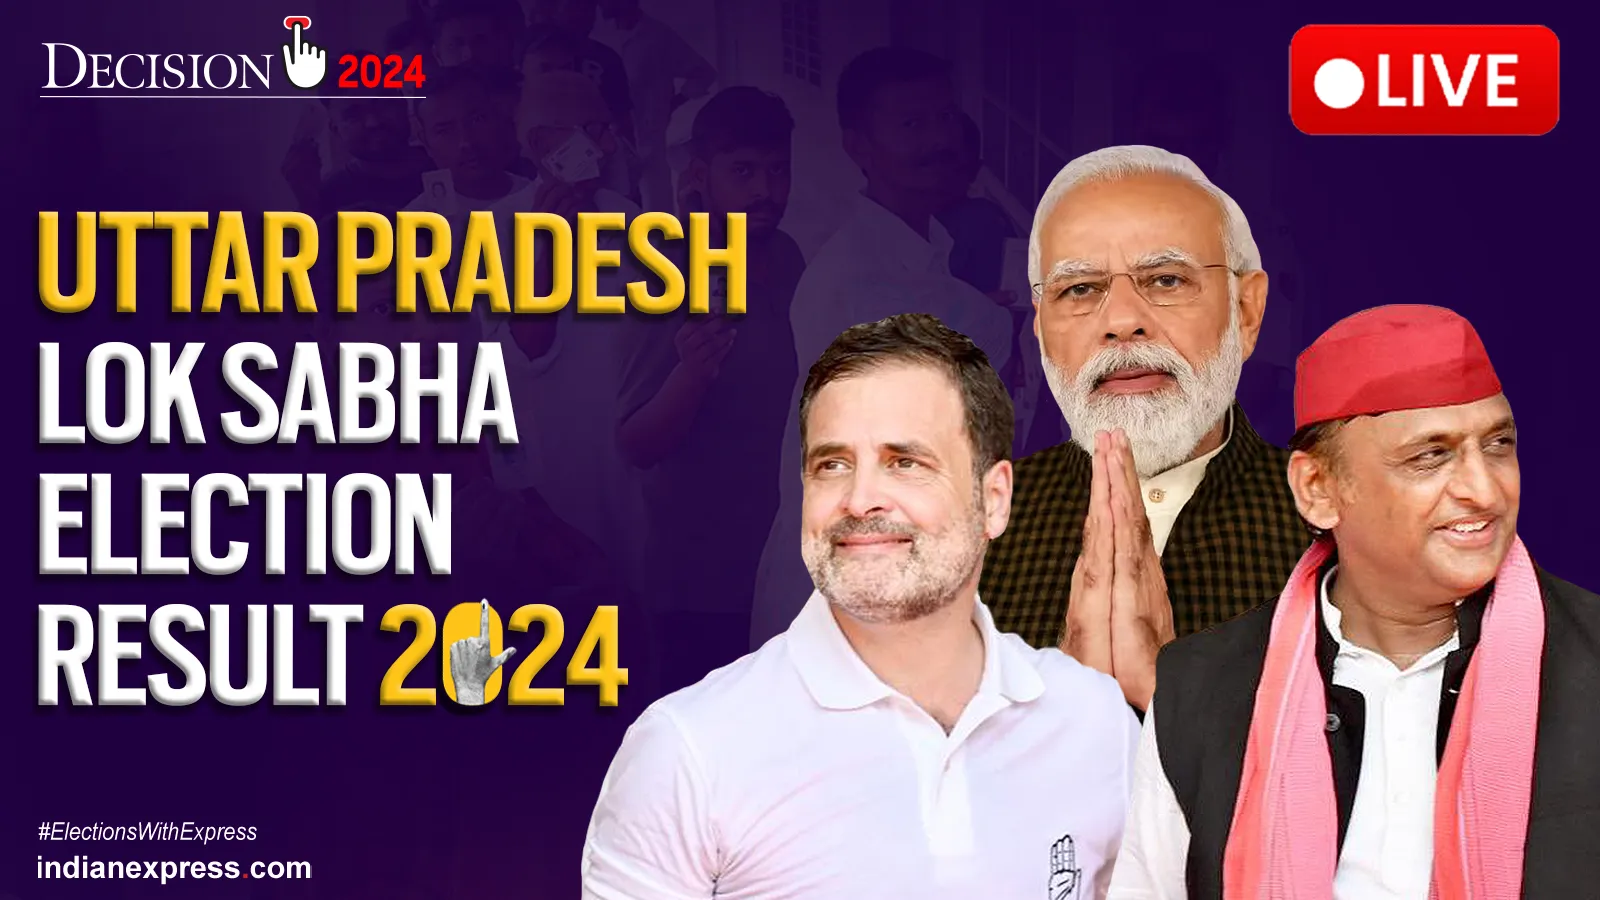 Uttar Pradesh Election Results 2024 Live Will BJP retain its hold over